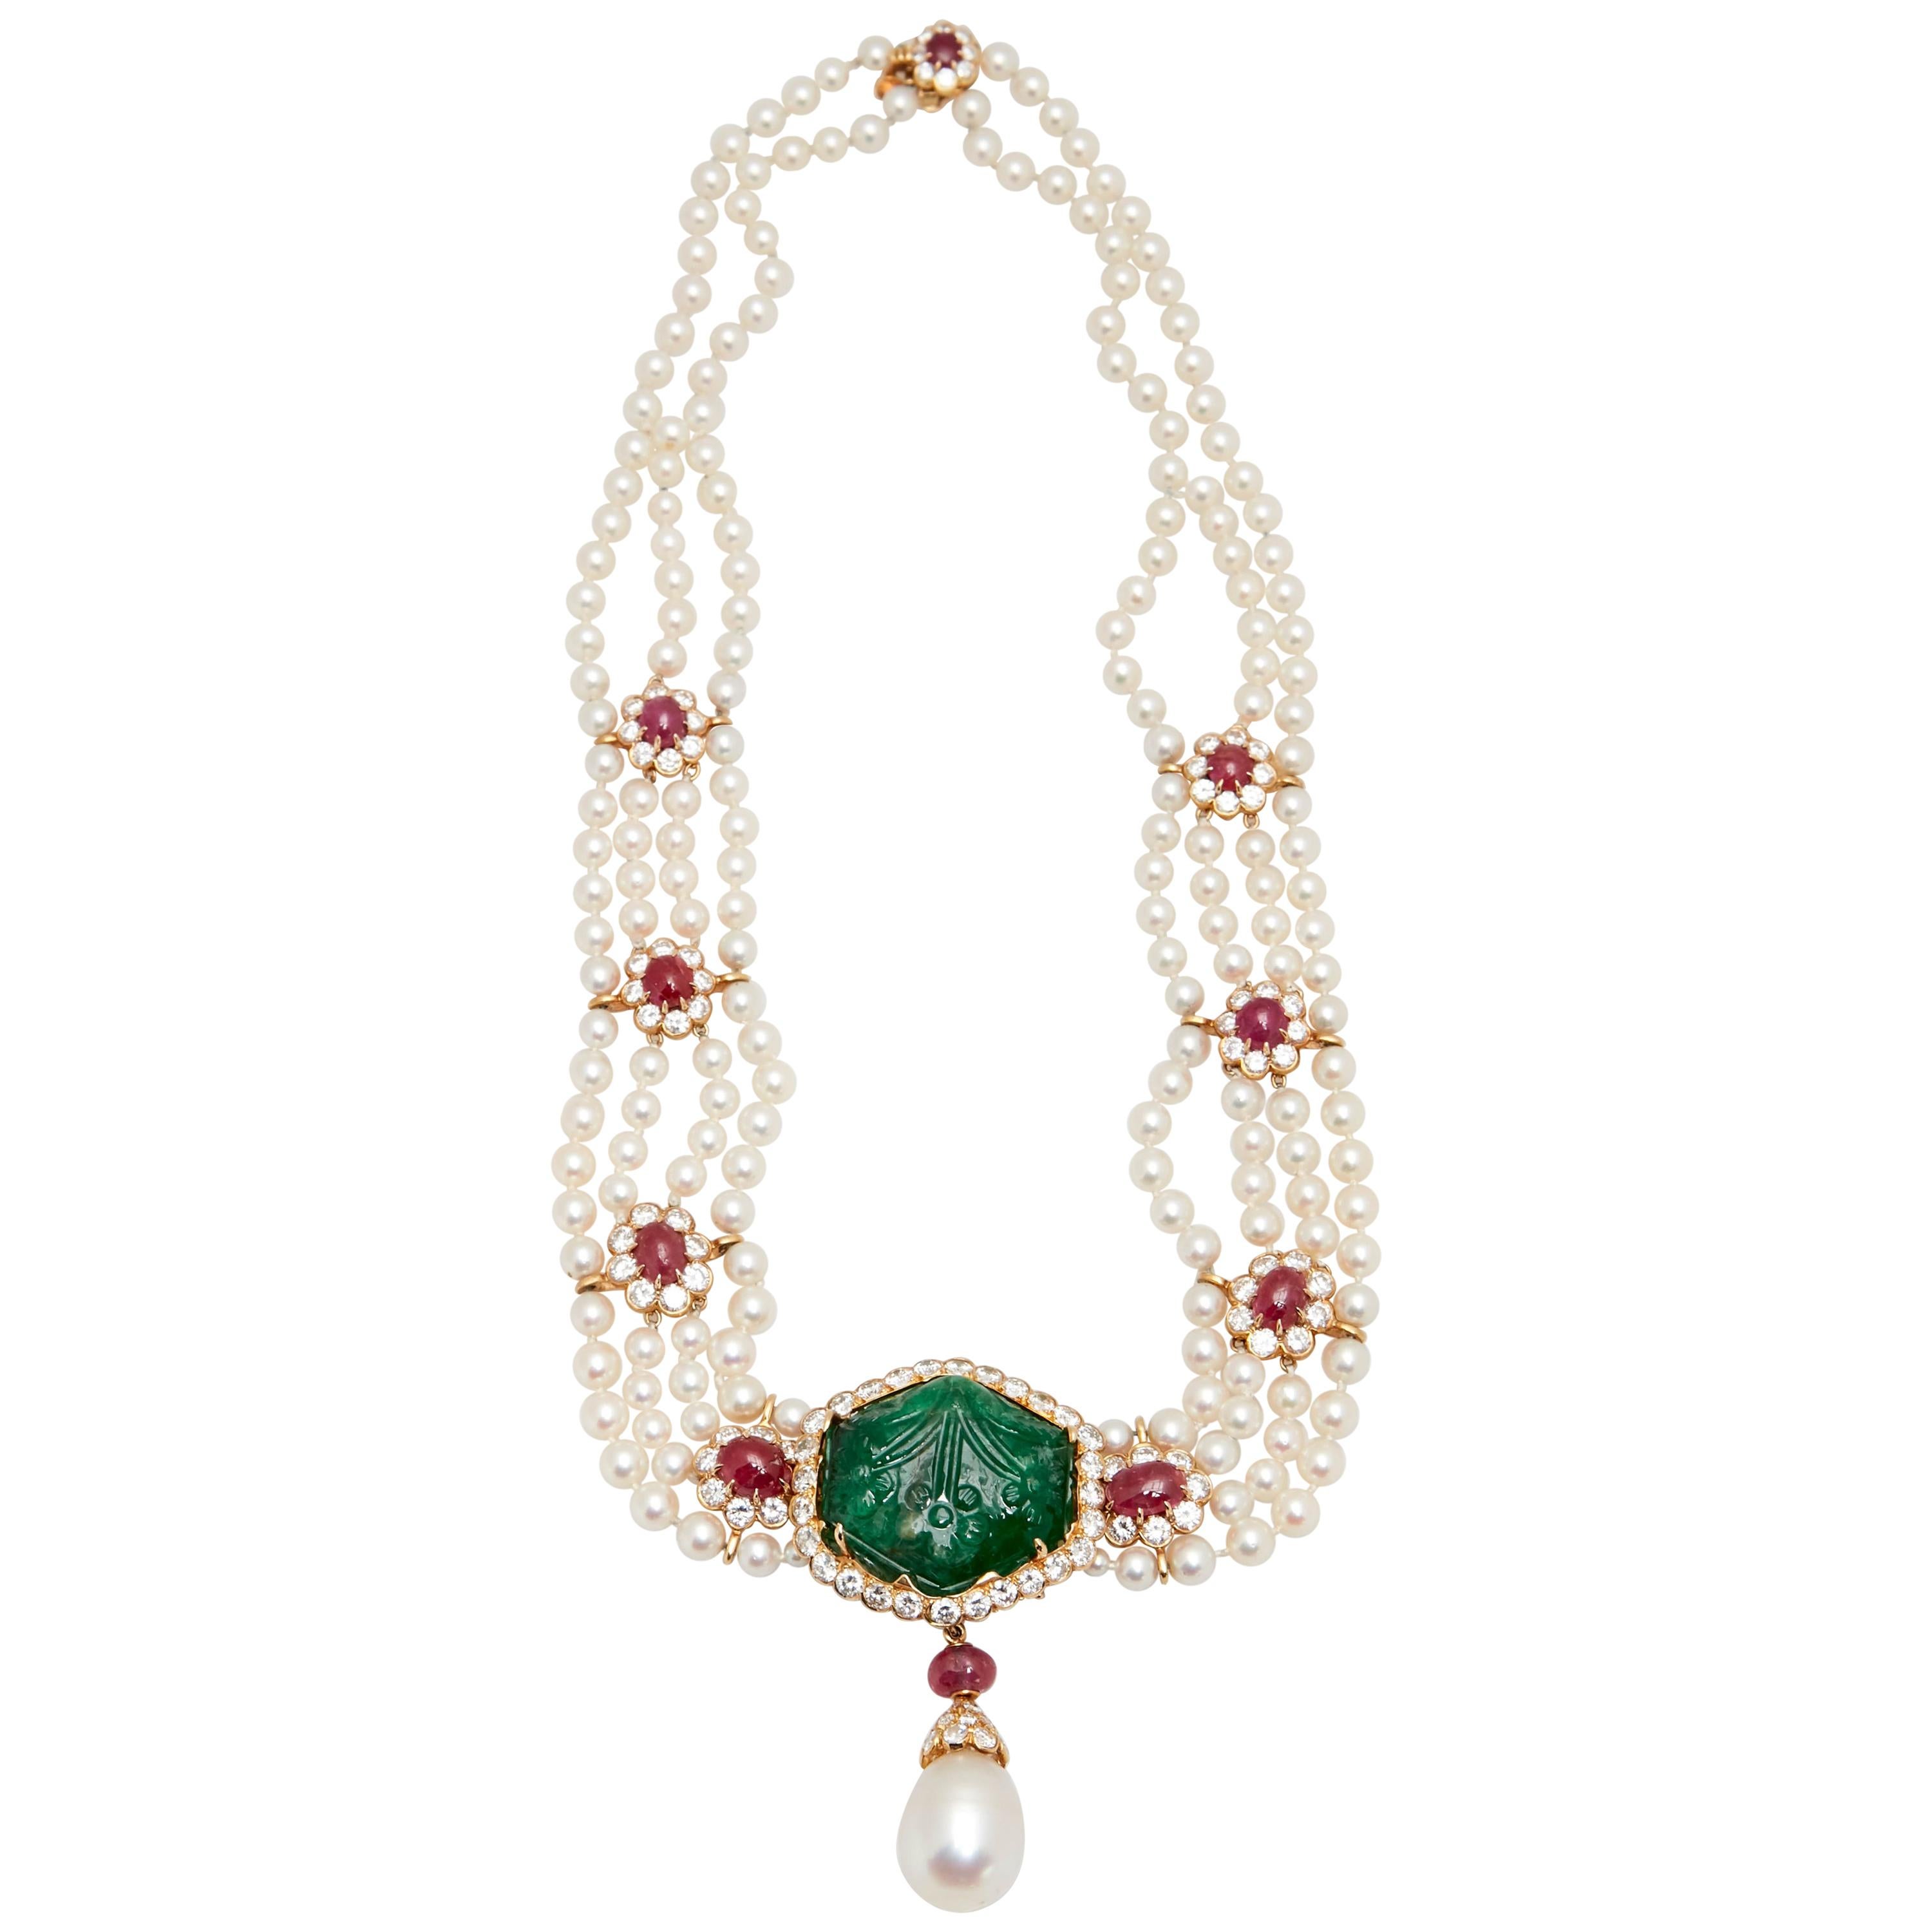 Collectable Van Cleef & Arpels four strand pearl, carved emerald, cabochon ruby, and diamond pendant-necklace, circa 1965. 

The double strand continuing to four strands of pearls approximately 4.8 to 4.0 mm., spaced by 8 oval cabochon rubies,